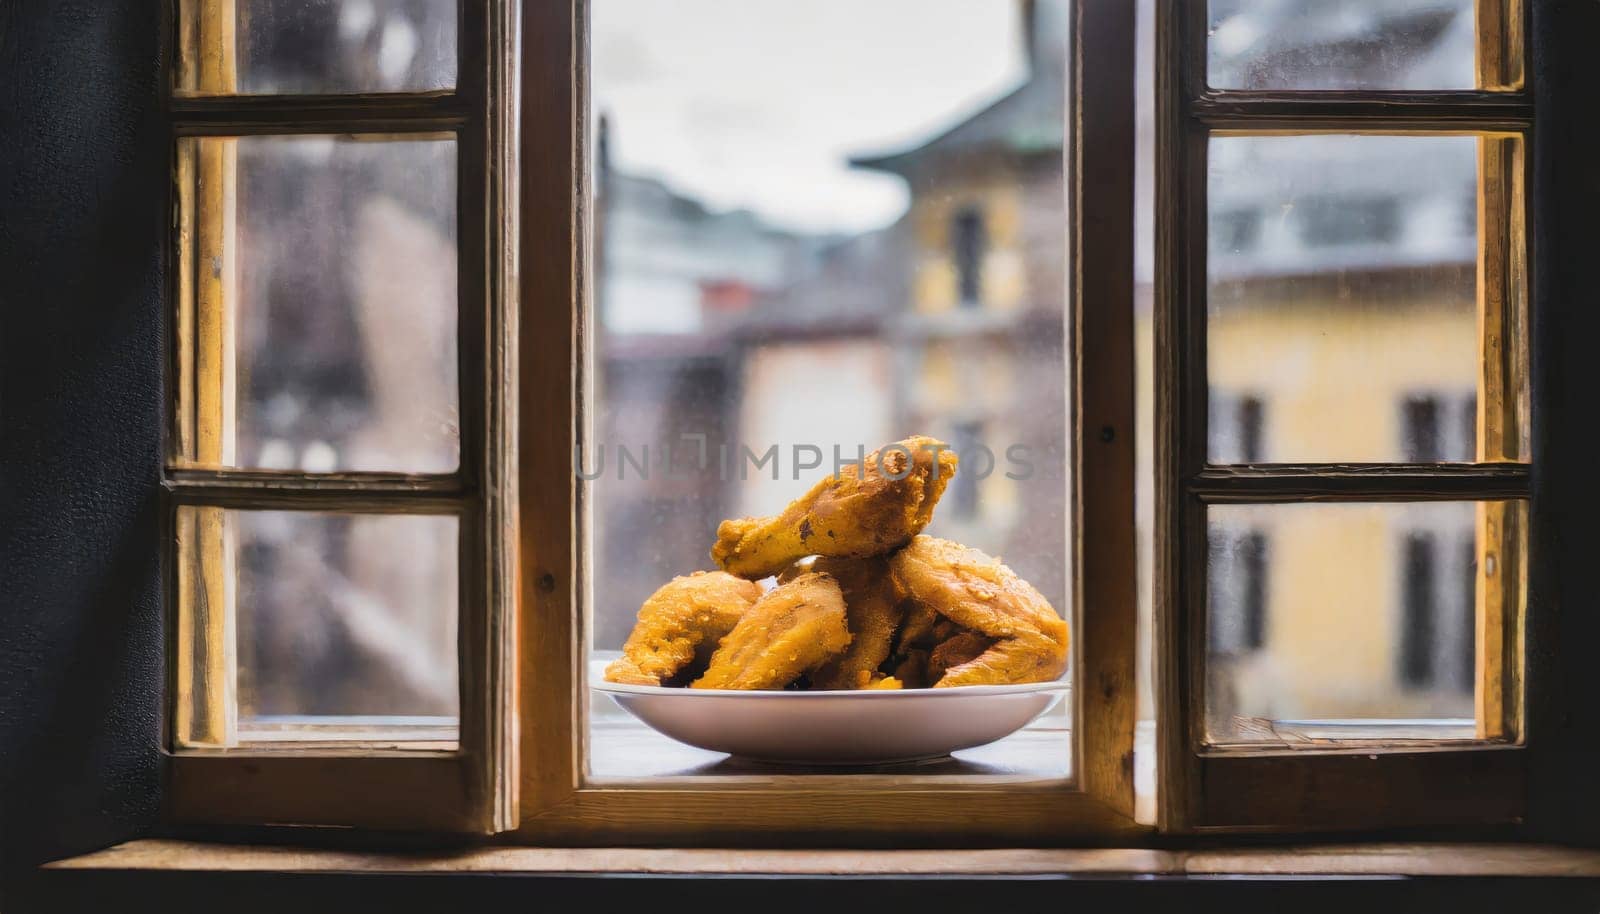 Copy Space image through the window of Fried Breaded chicken tender